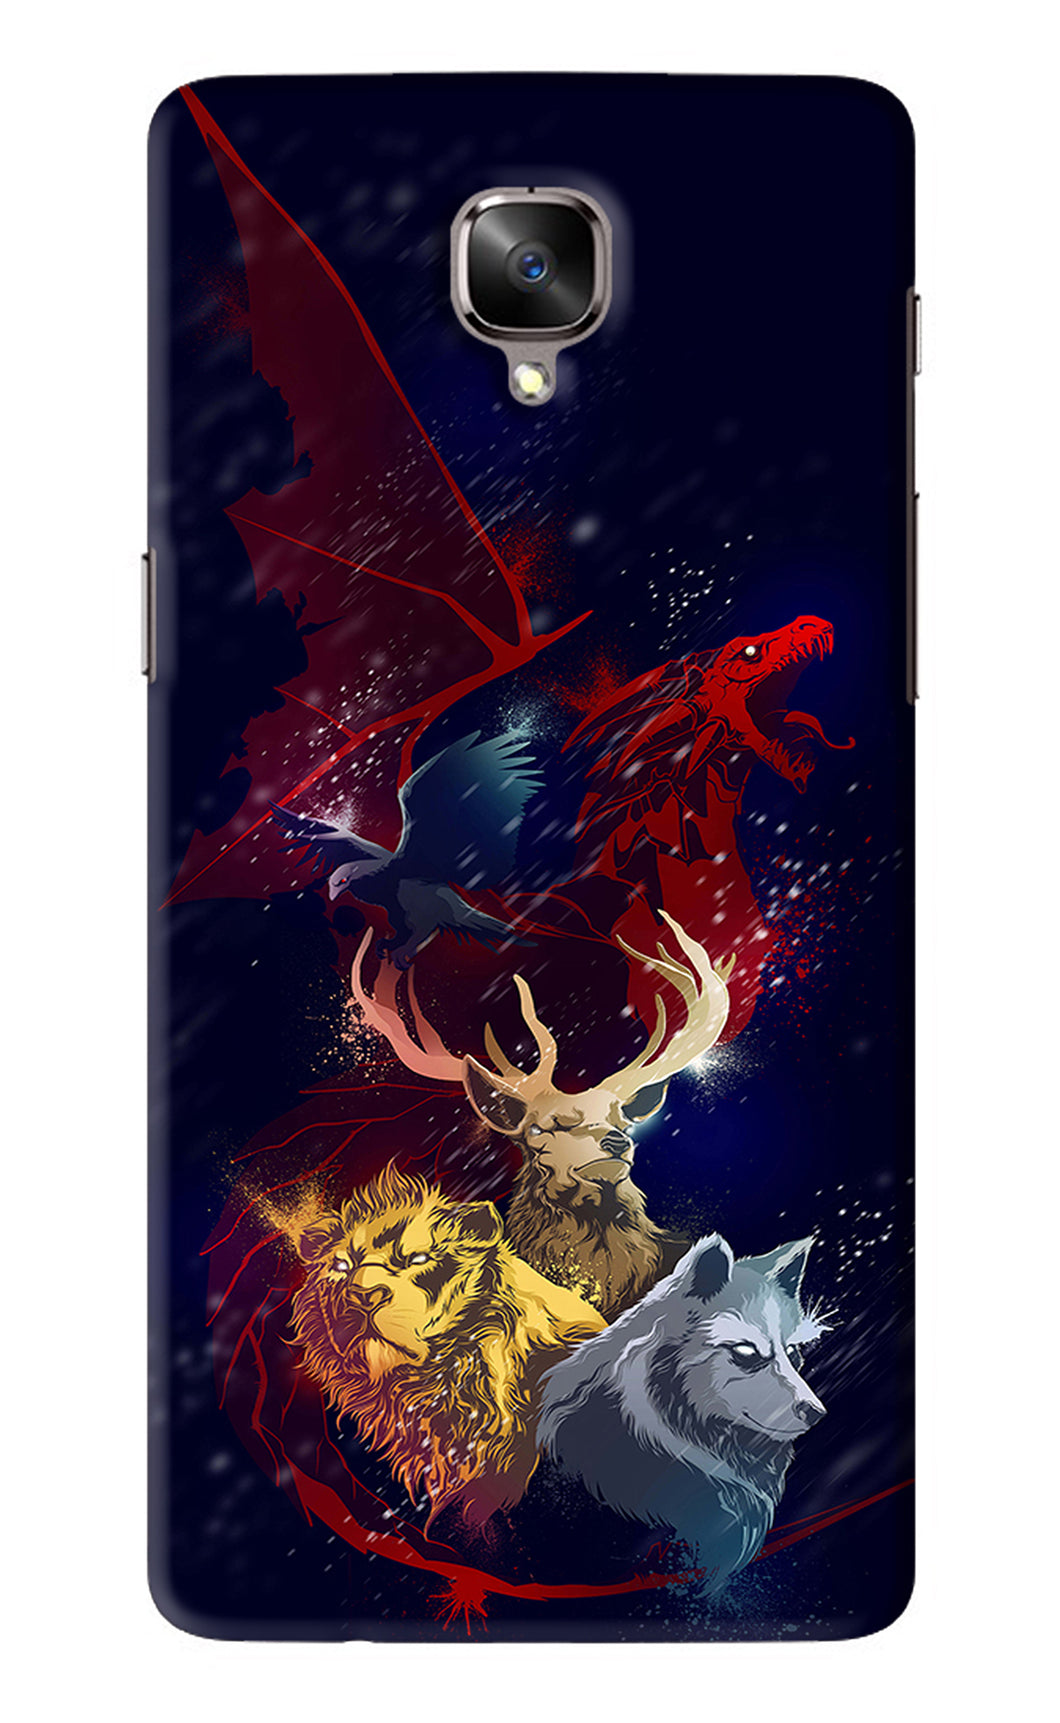 Game Of Thrones OnePlus 3T Back Skin Wrap